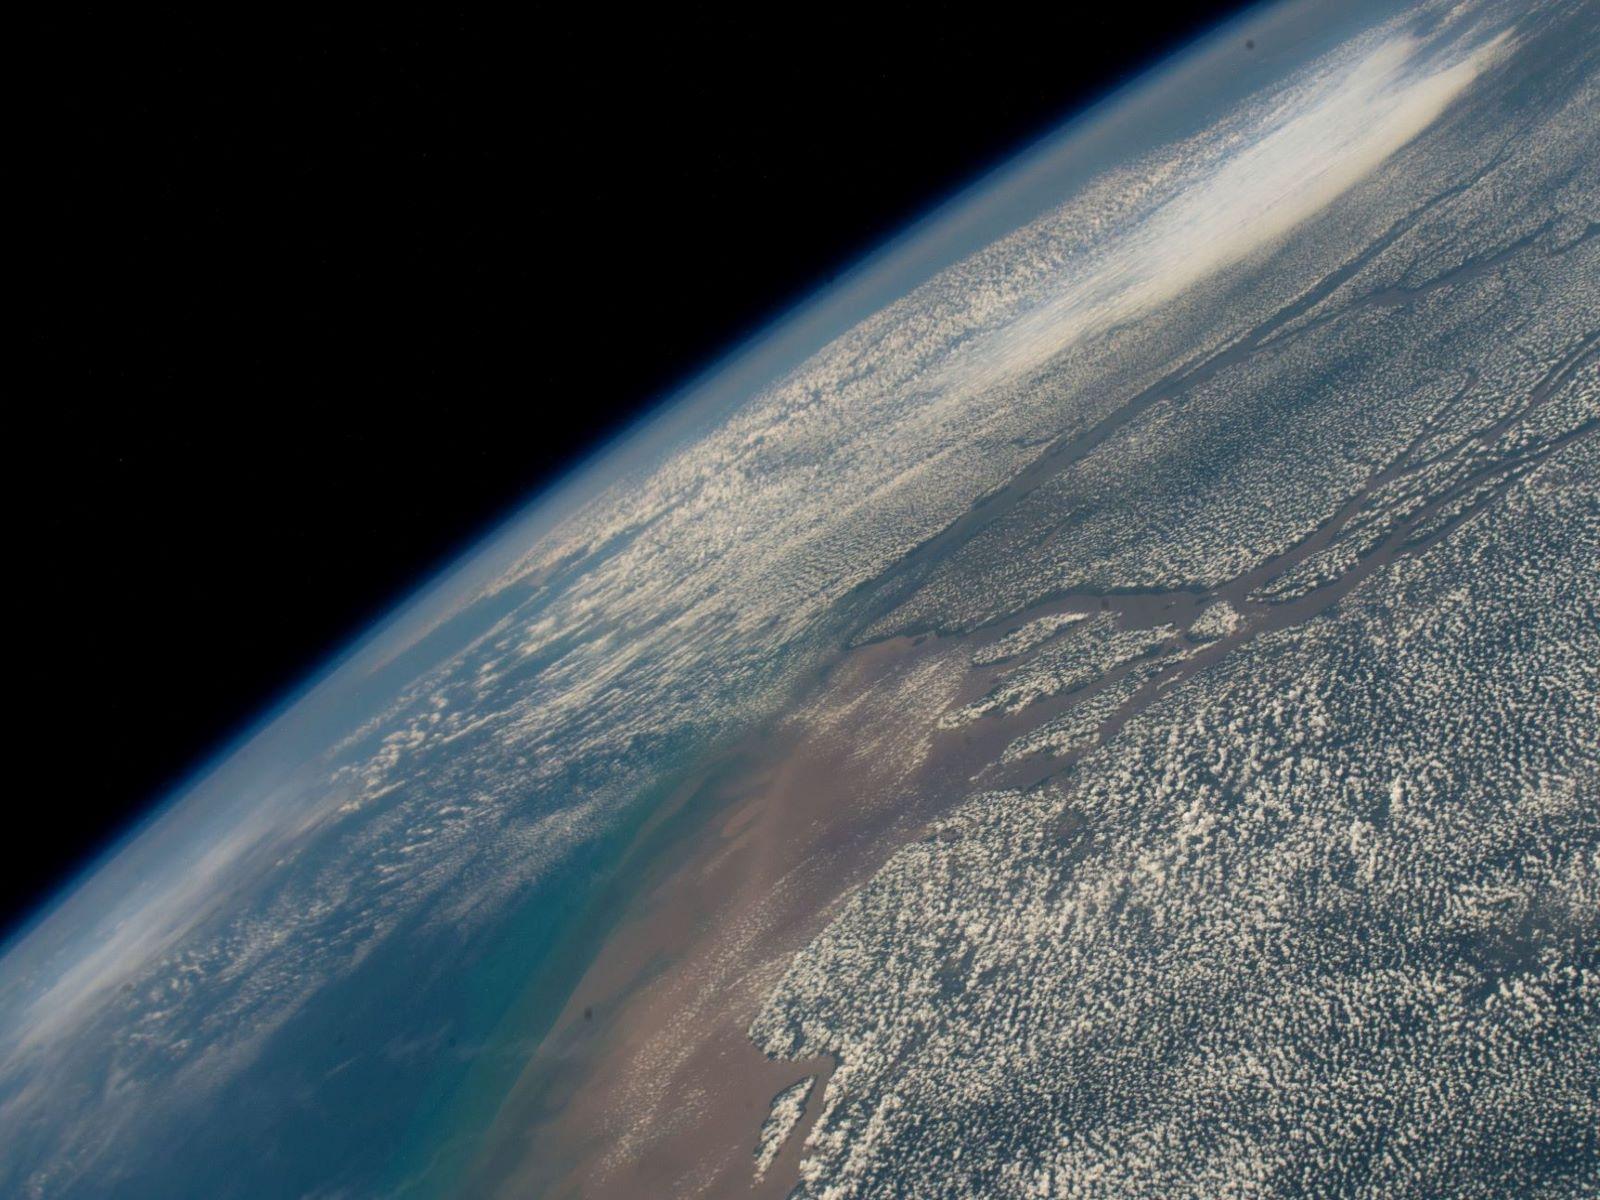 Image of the Amazon river from space